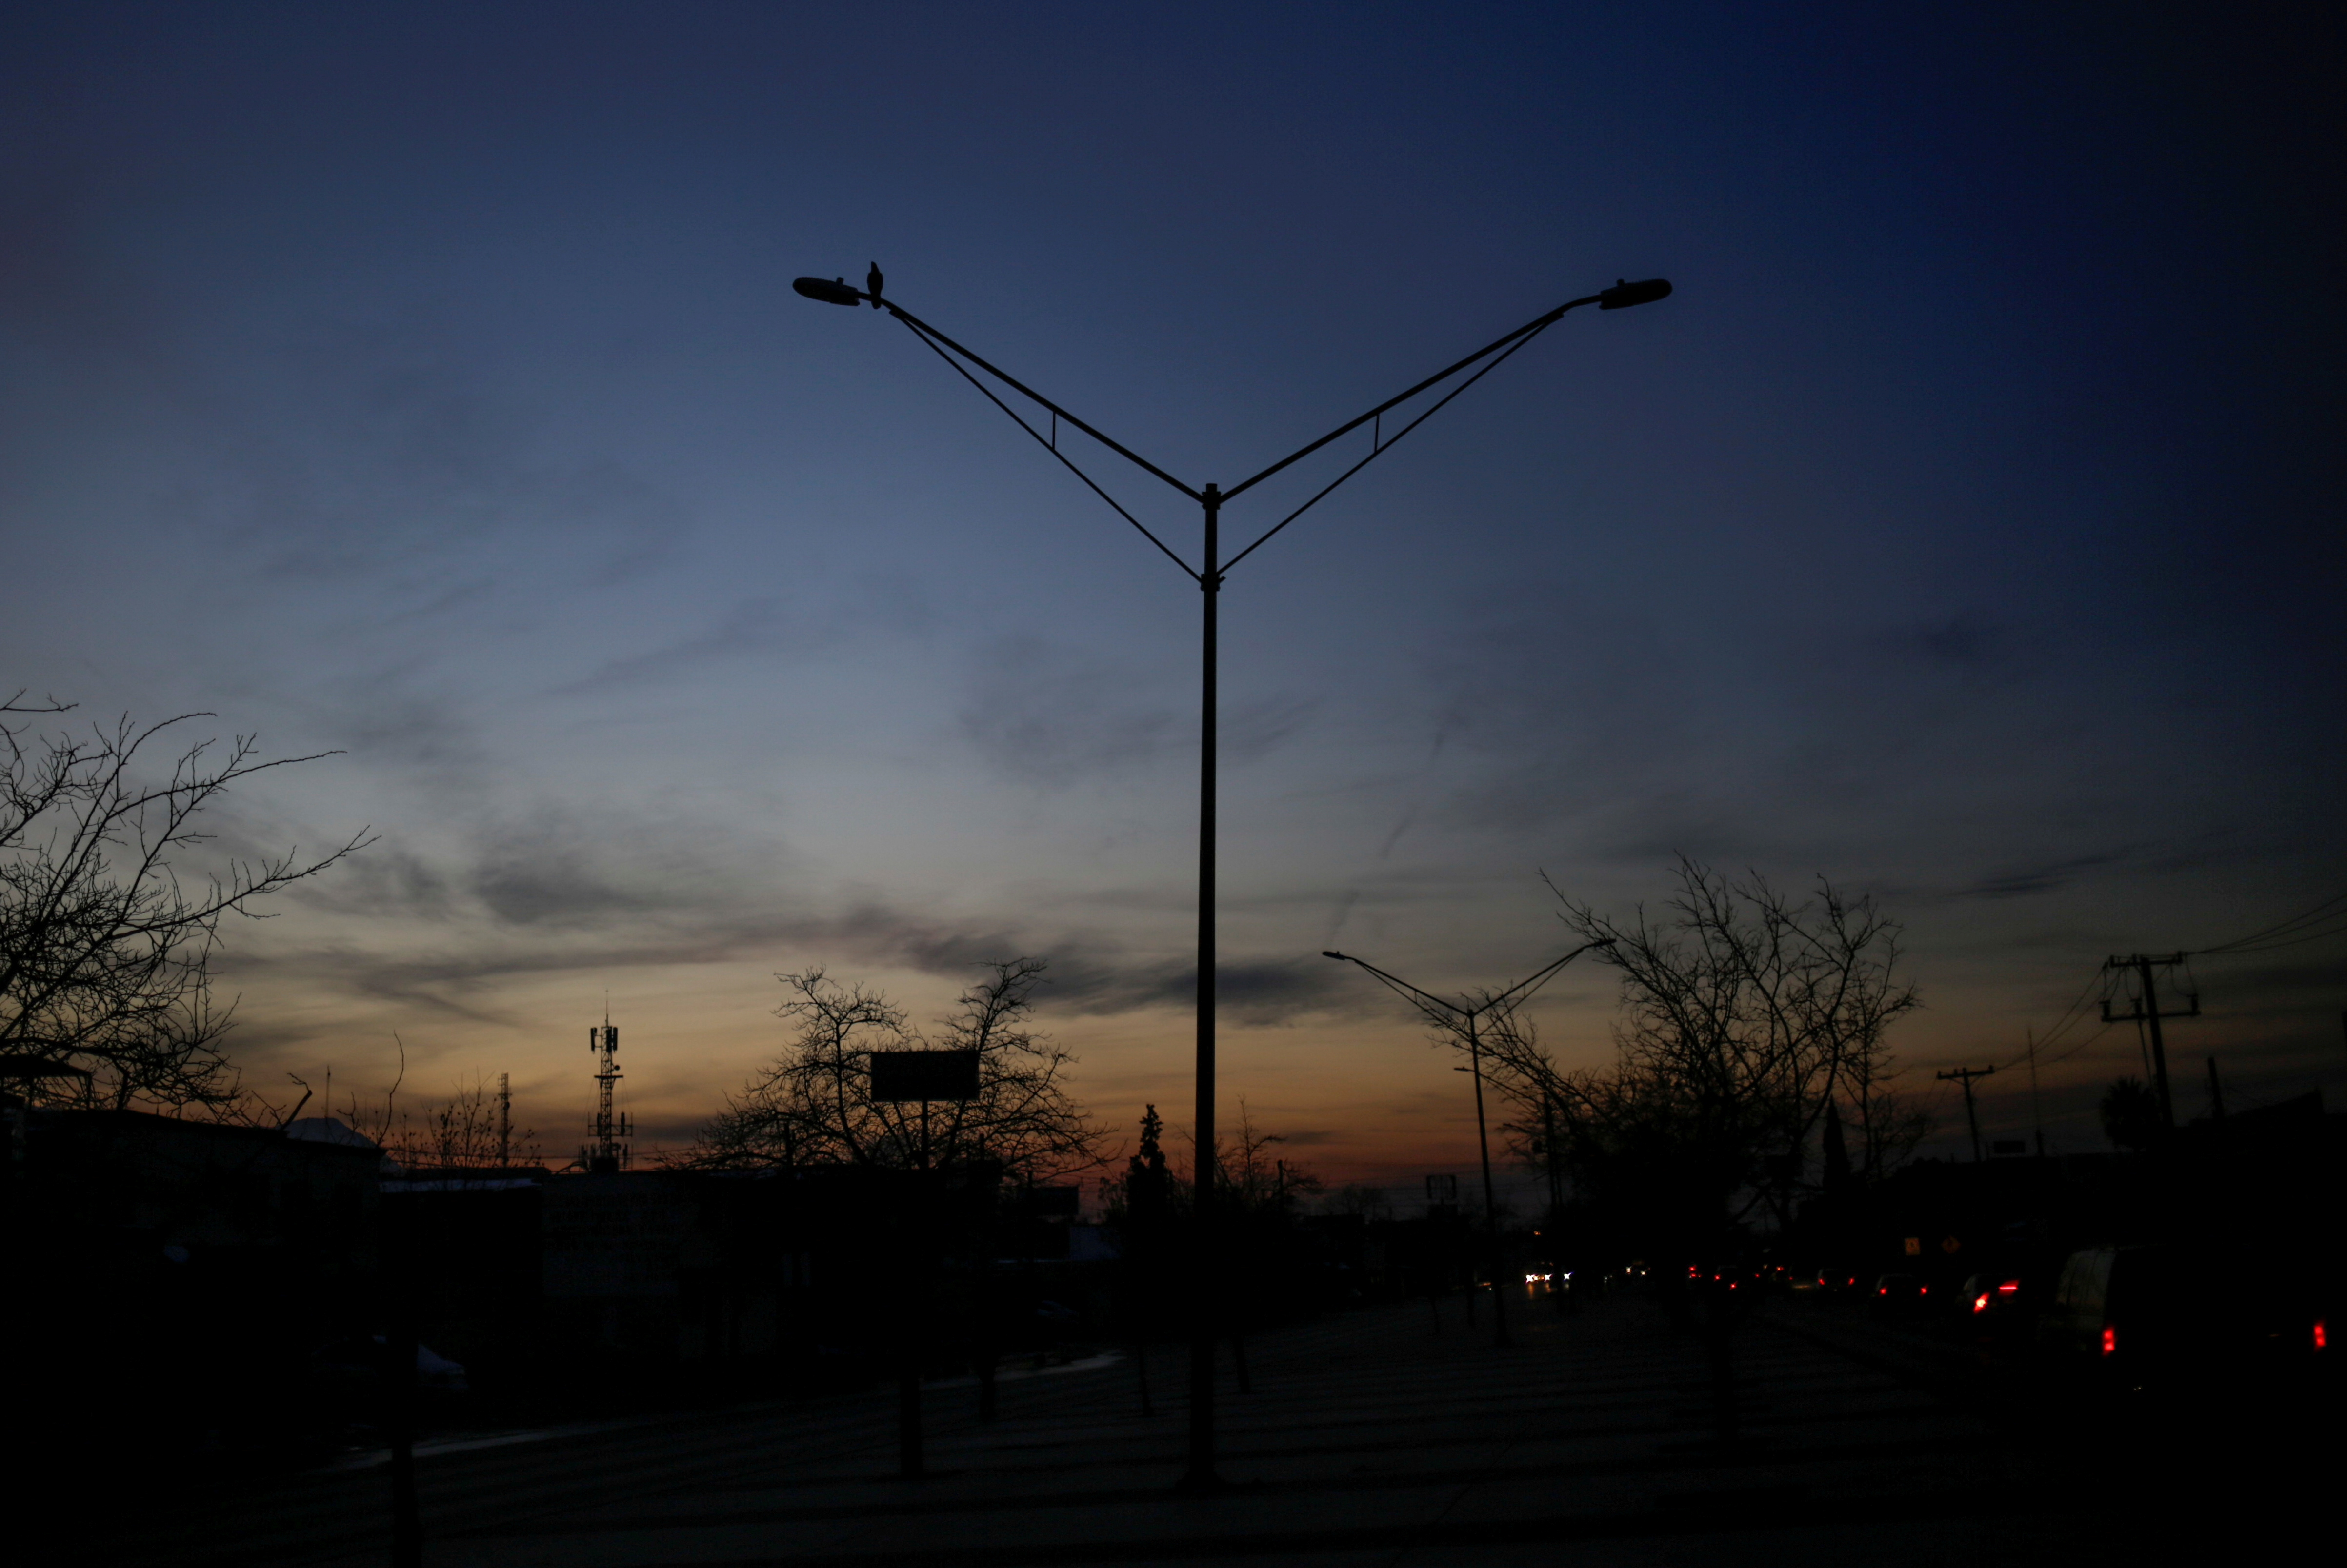 Light poles are pictured without power during an outage in Mexico's electricity network, in Ciudad Juarez